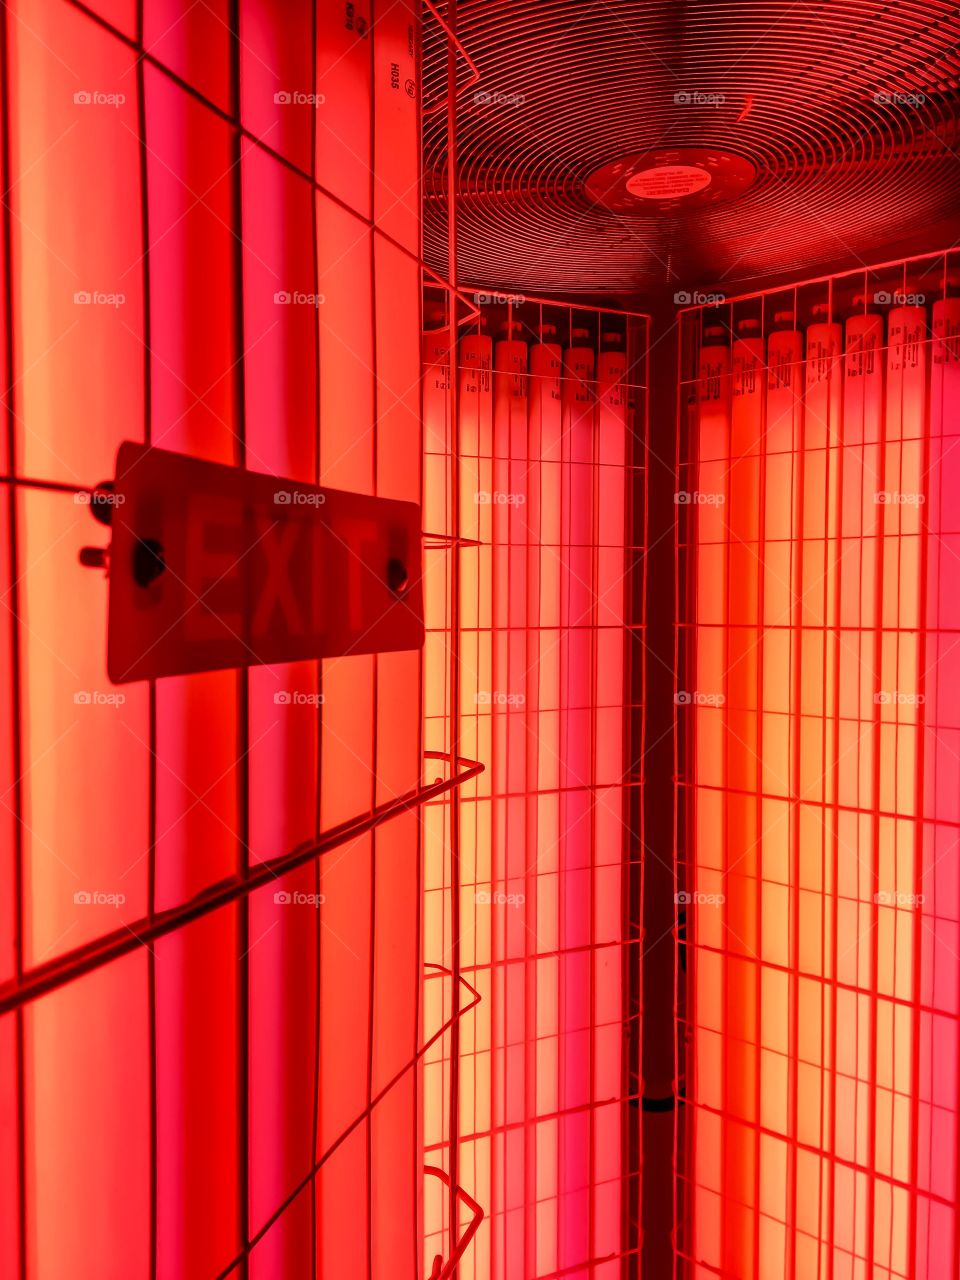 Red Light Therapy aka
Pain Management 